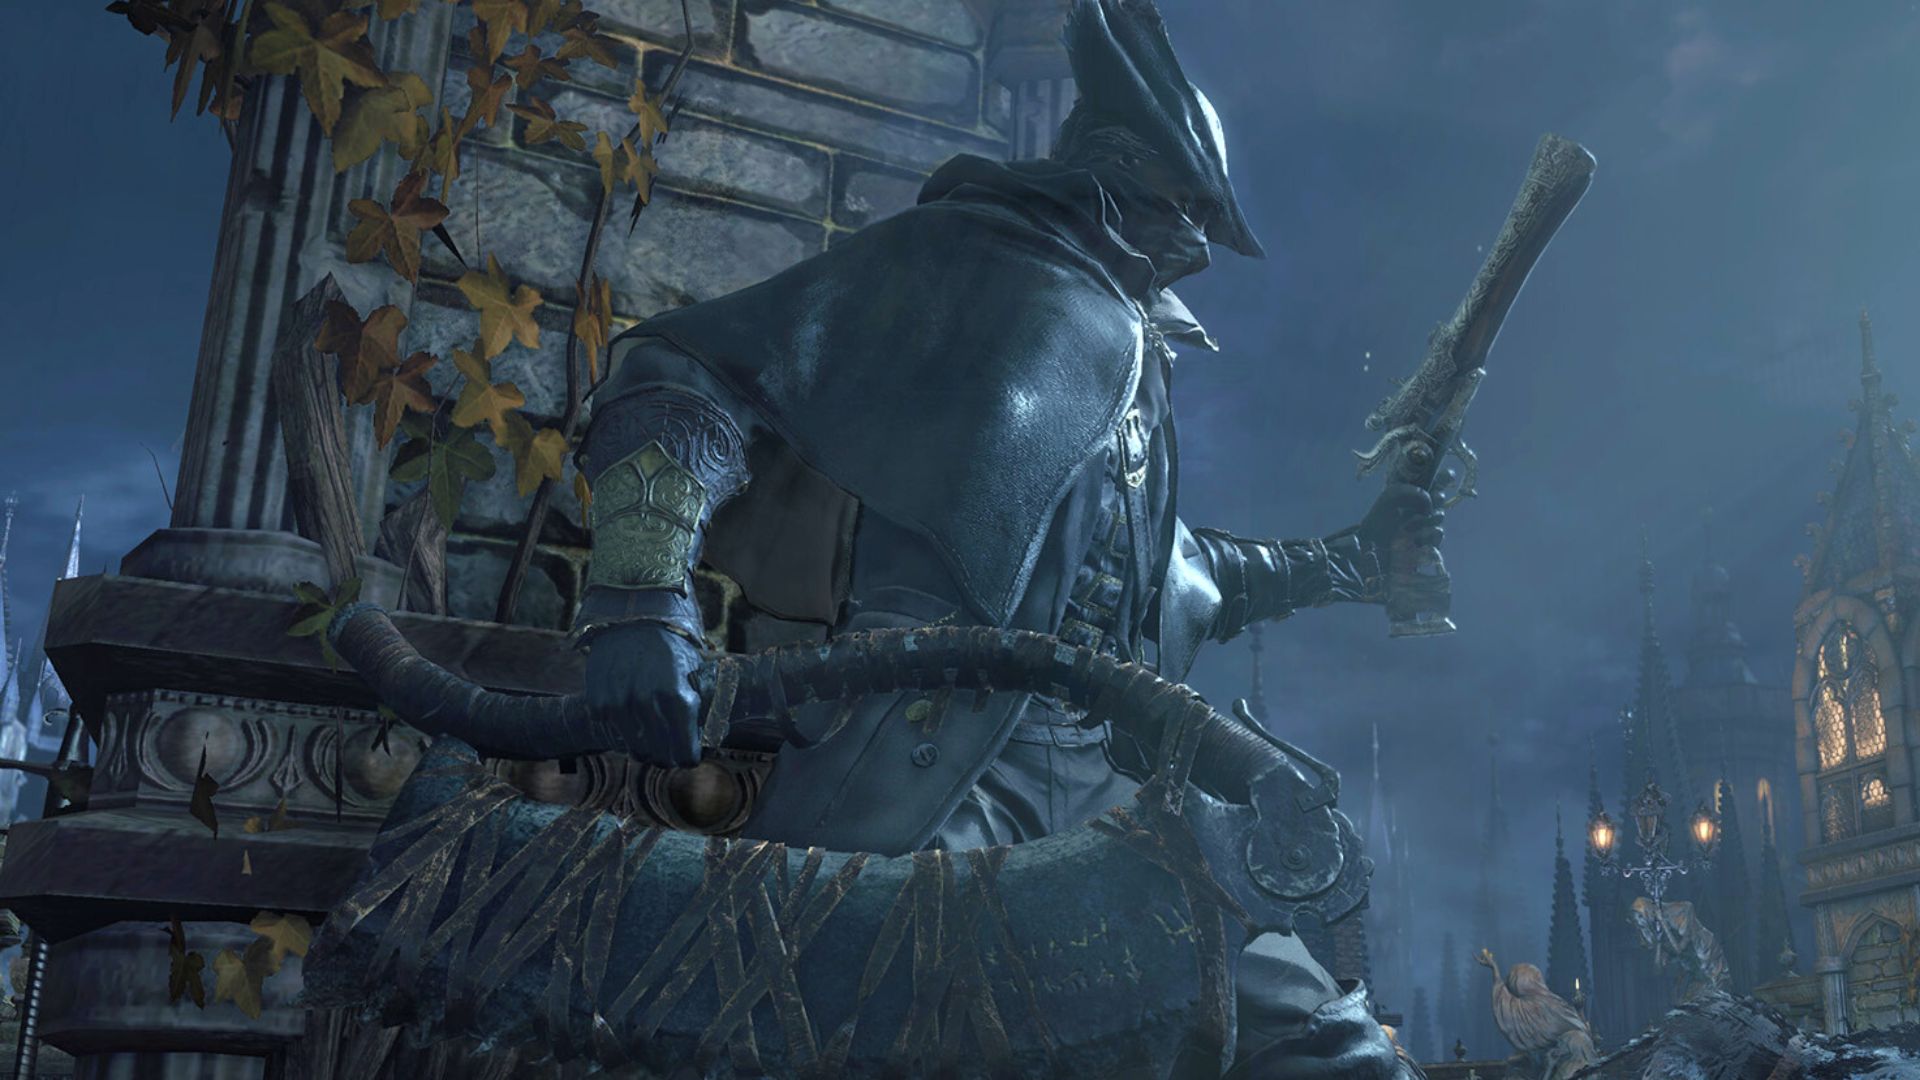 More PlayStation exclusives coming to PC - Is Bloodborne coming next?, Gaming, Entertainment